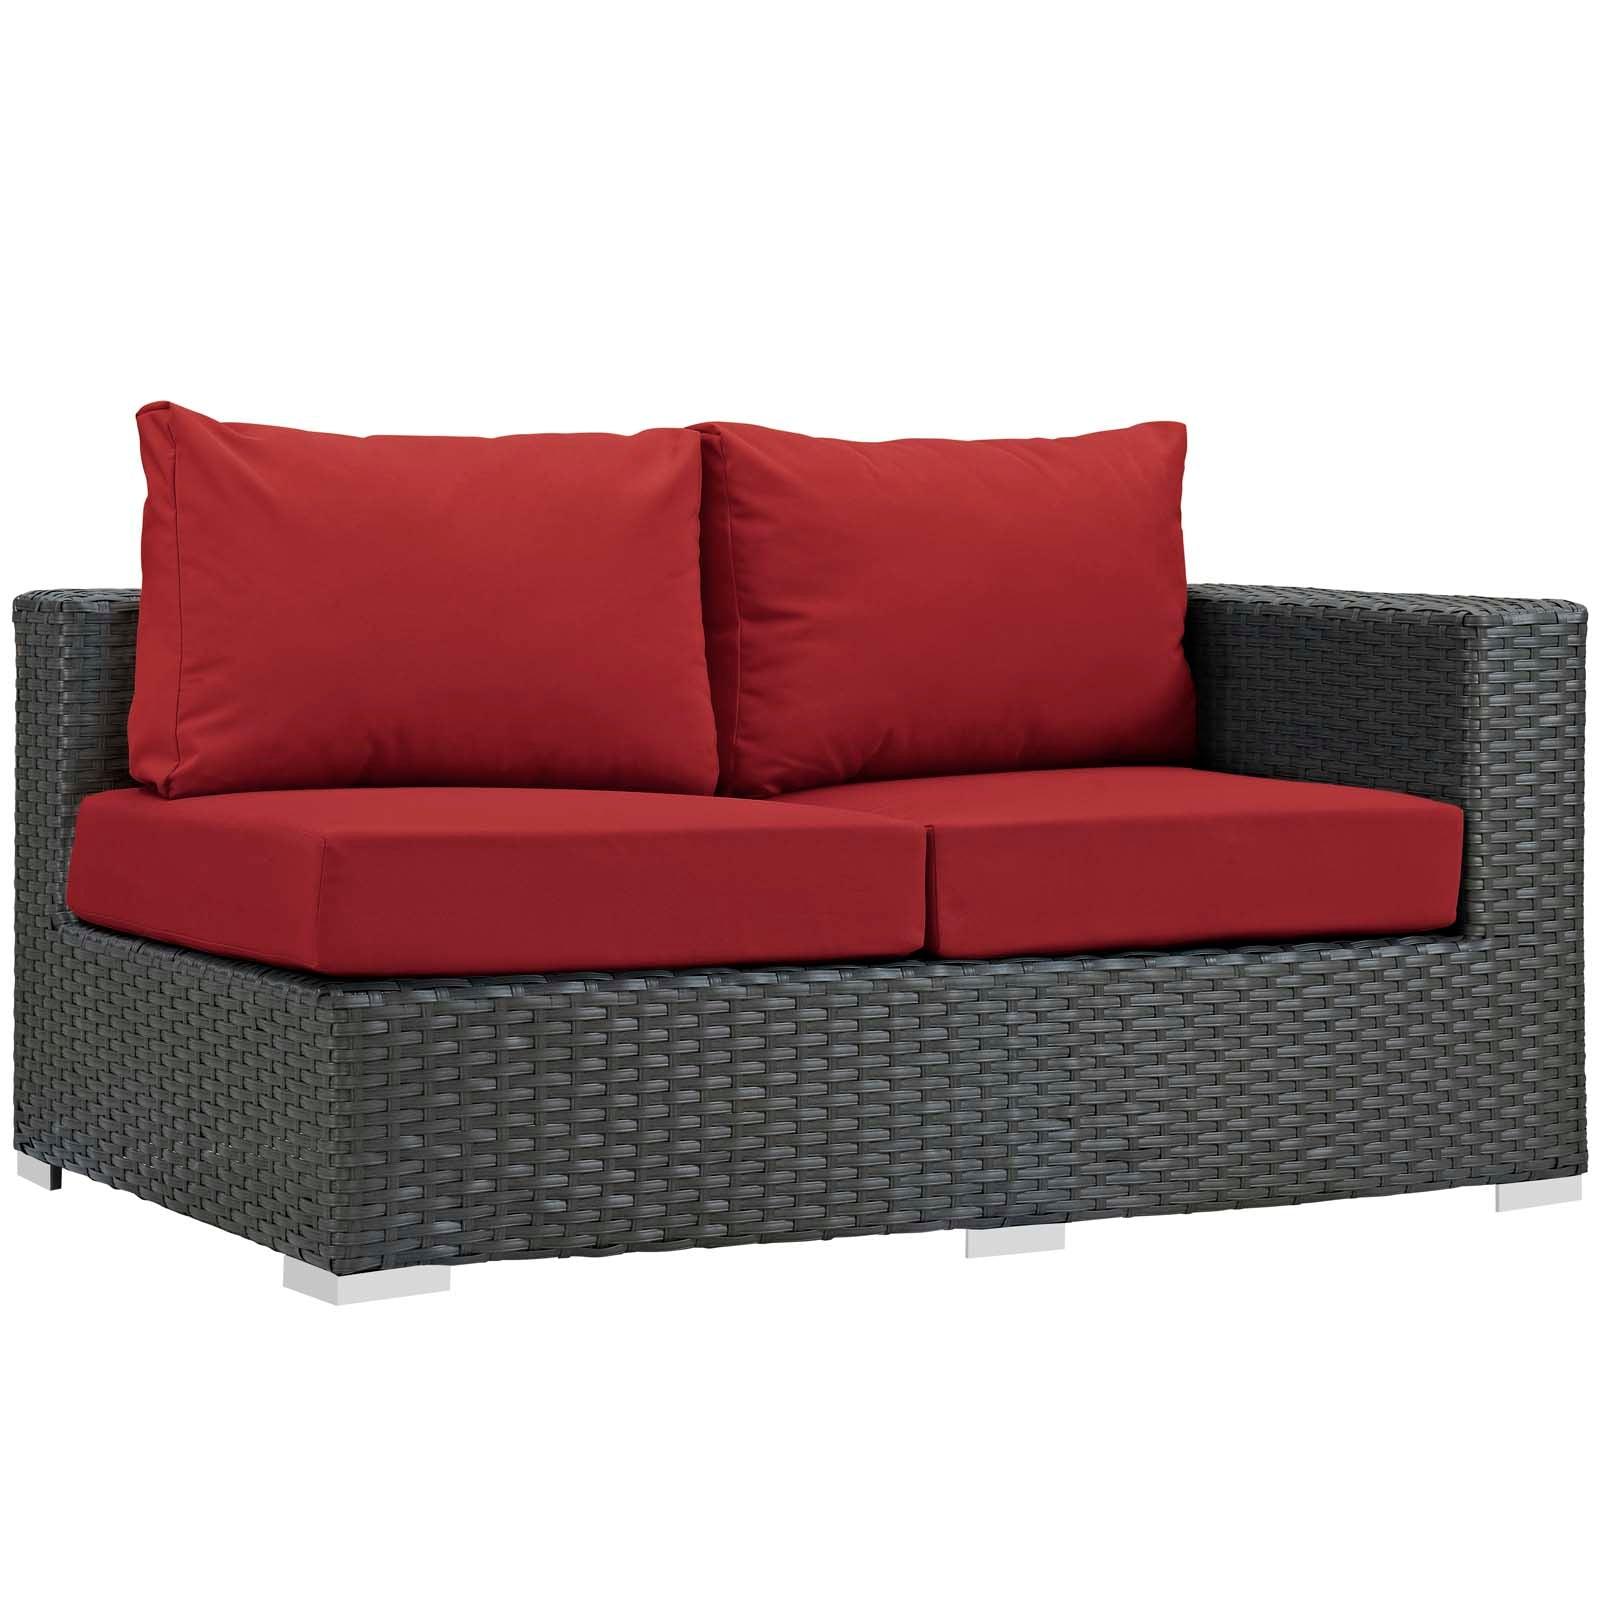 Modway Sojourn 11 Piece Outdoor Patio Sunbrella® Sectional Set FredCo